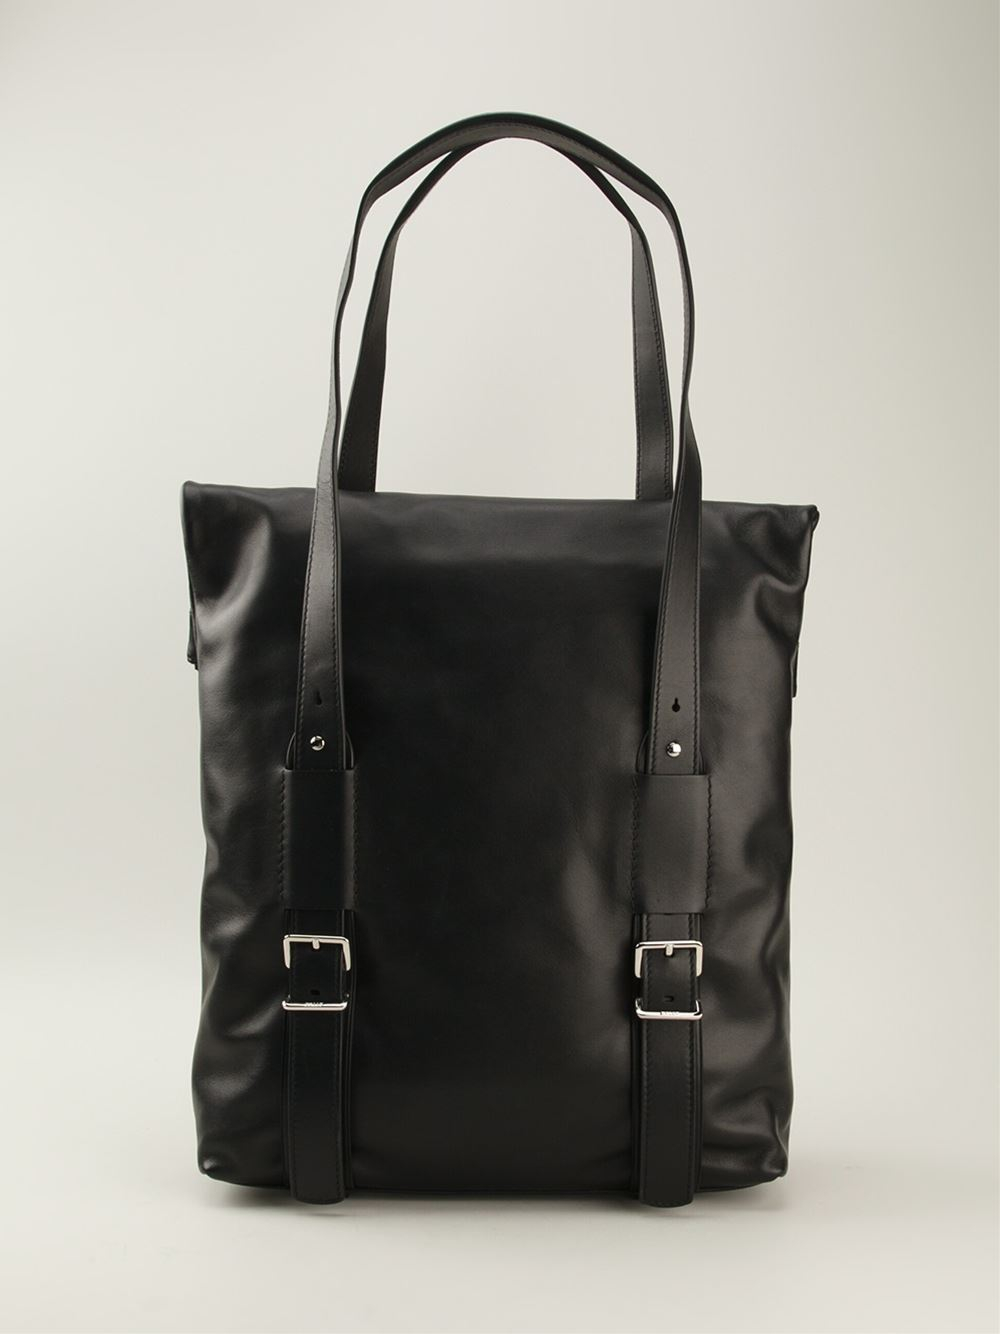 Bally Punched Leather Tote Bag in Black for Men - Lyst